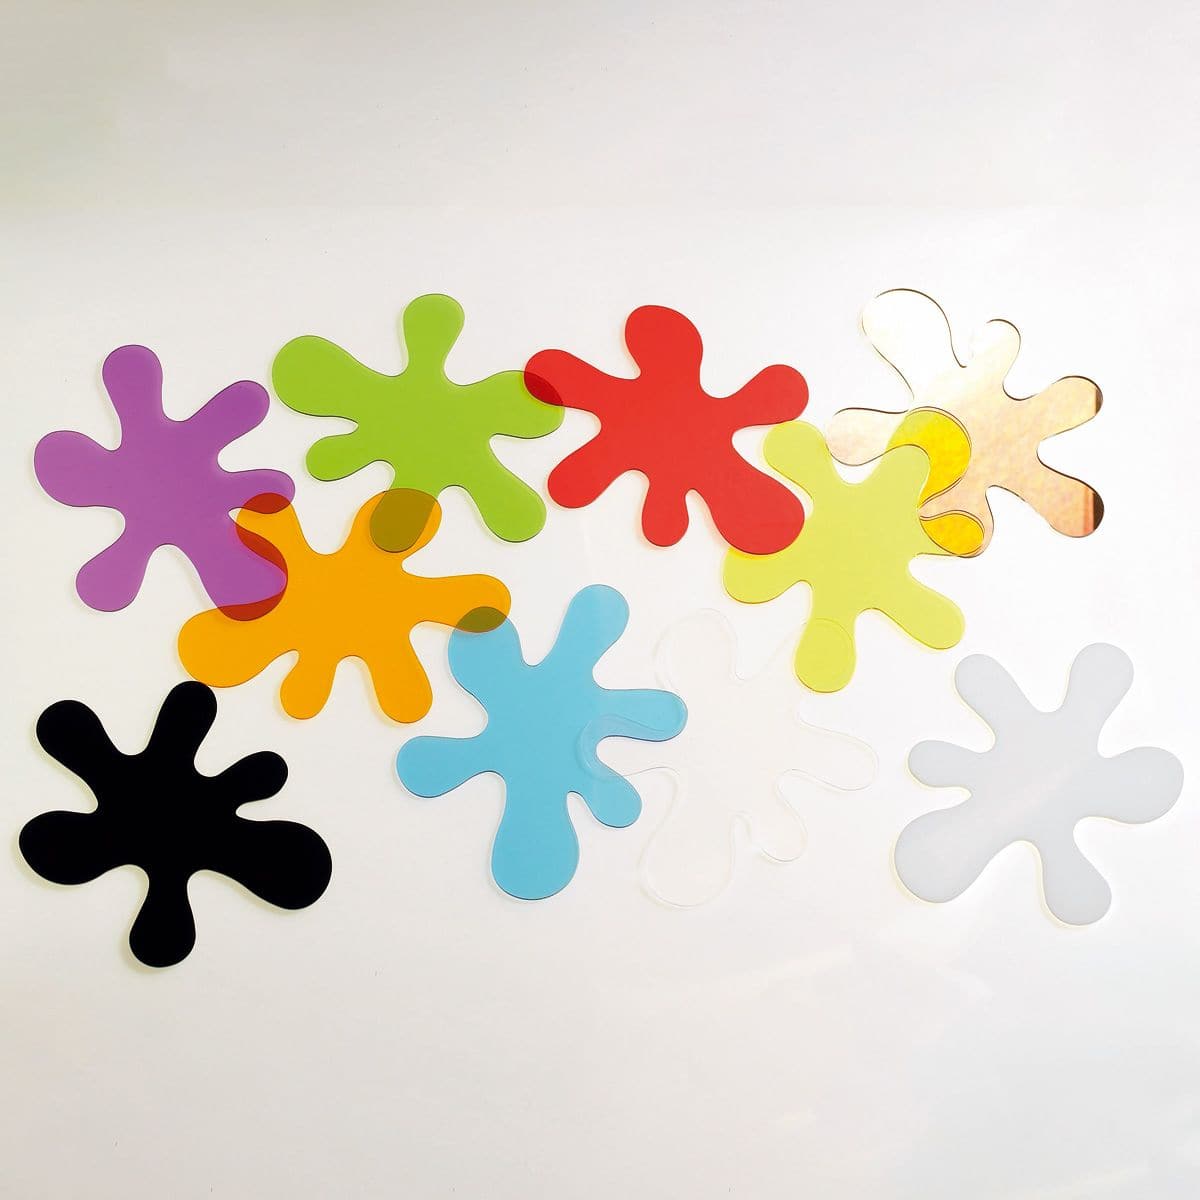 Colour Mixing Splats, The Colour Mixing Splats are colourful transparent and opaque acrylic pieces in the shape of a ‘dropped paint splat’ made in the primary and secondary colours (red, blue, yellow, green, orange and purple) as well as clear, black and white and double sided mirrored (black, white and mirrored are opaque). The Colour Mixing Splats can be used on their own or on a light box, for colour mixing, matching, light observation, shadow making and for wall decoration near to the painting area. Ide